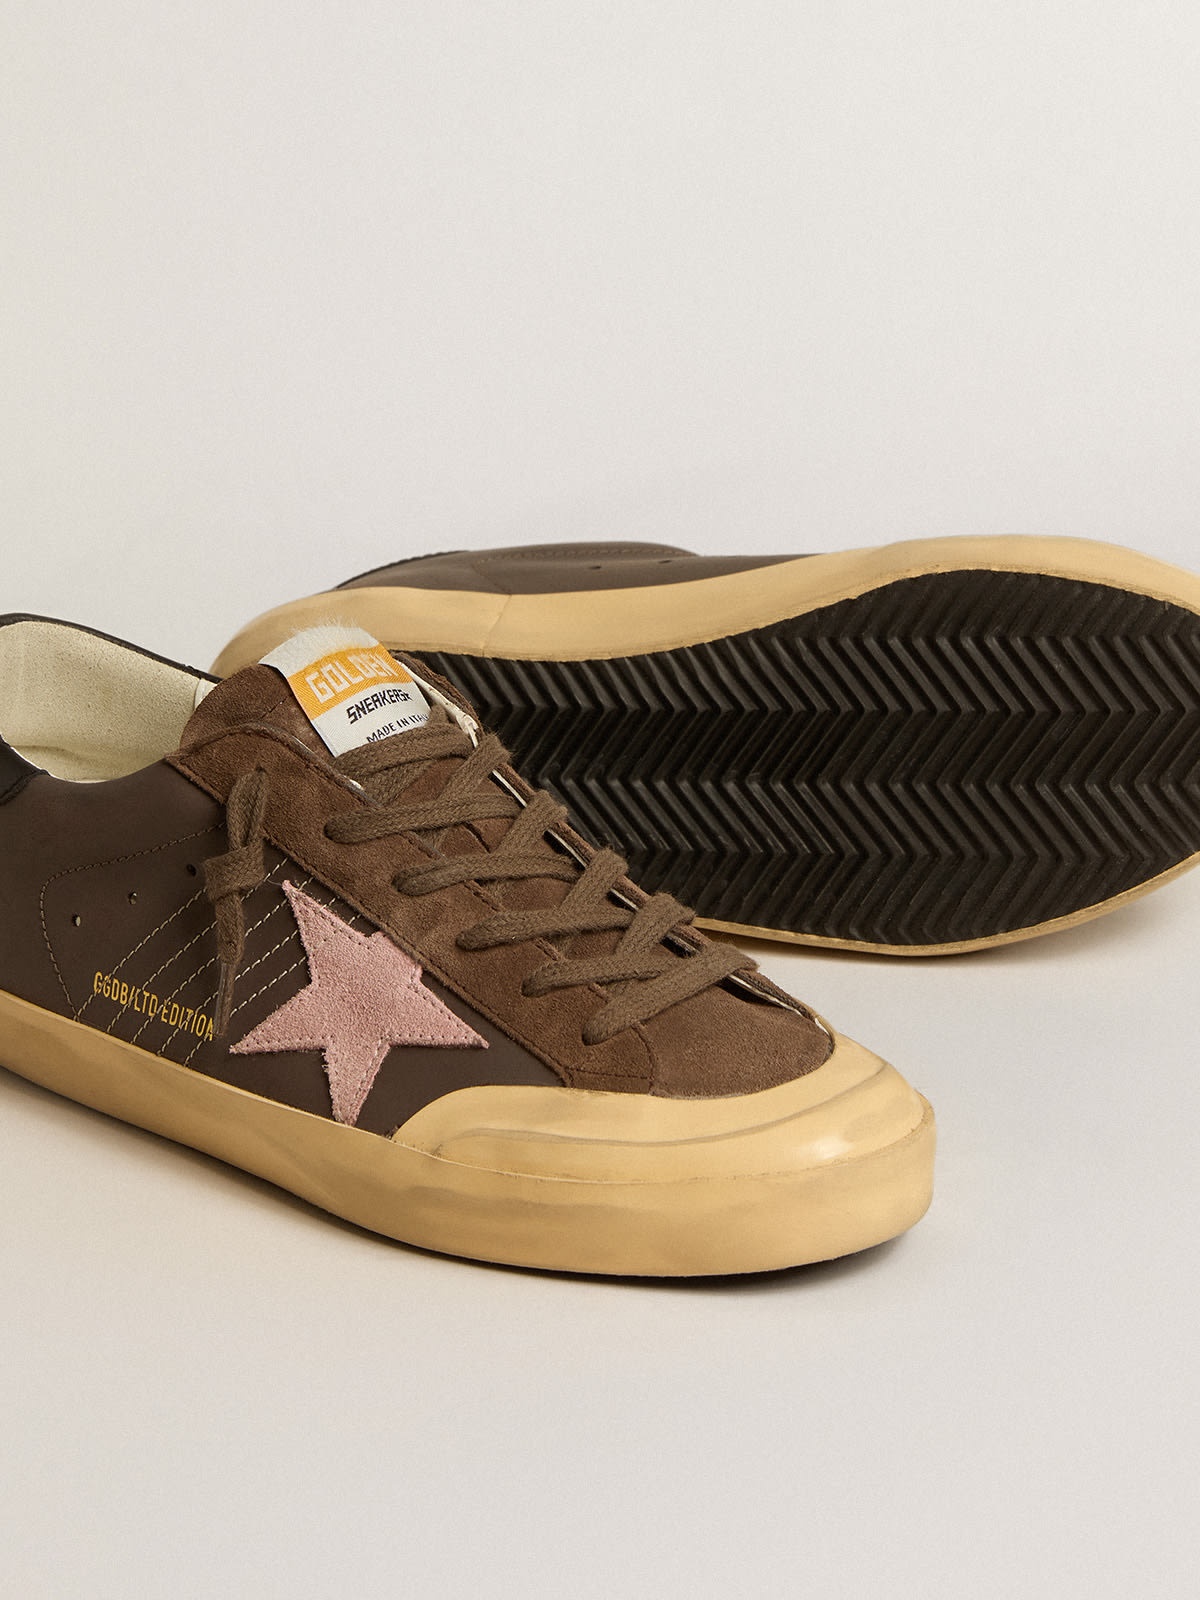 Super-Star Penstar LTD in brown leather with pink suede star - 3